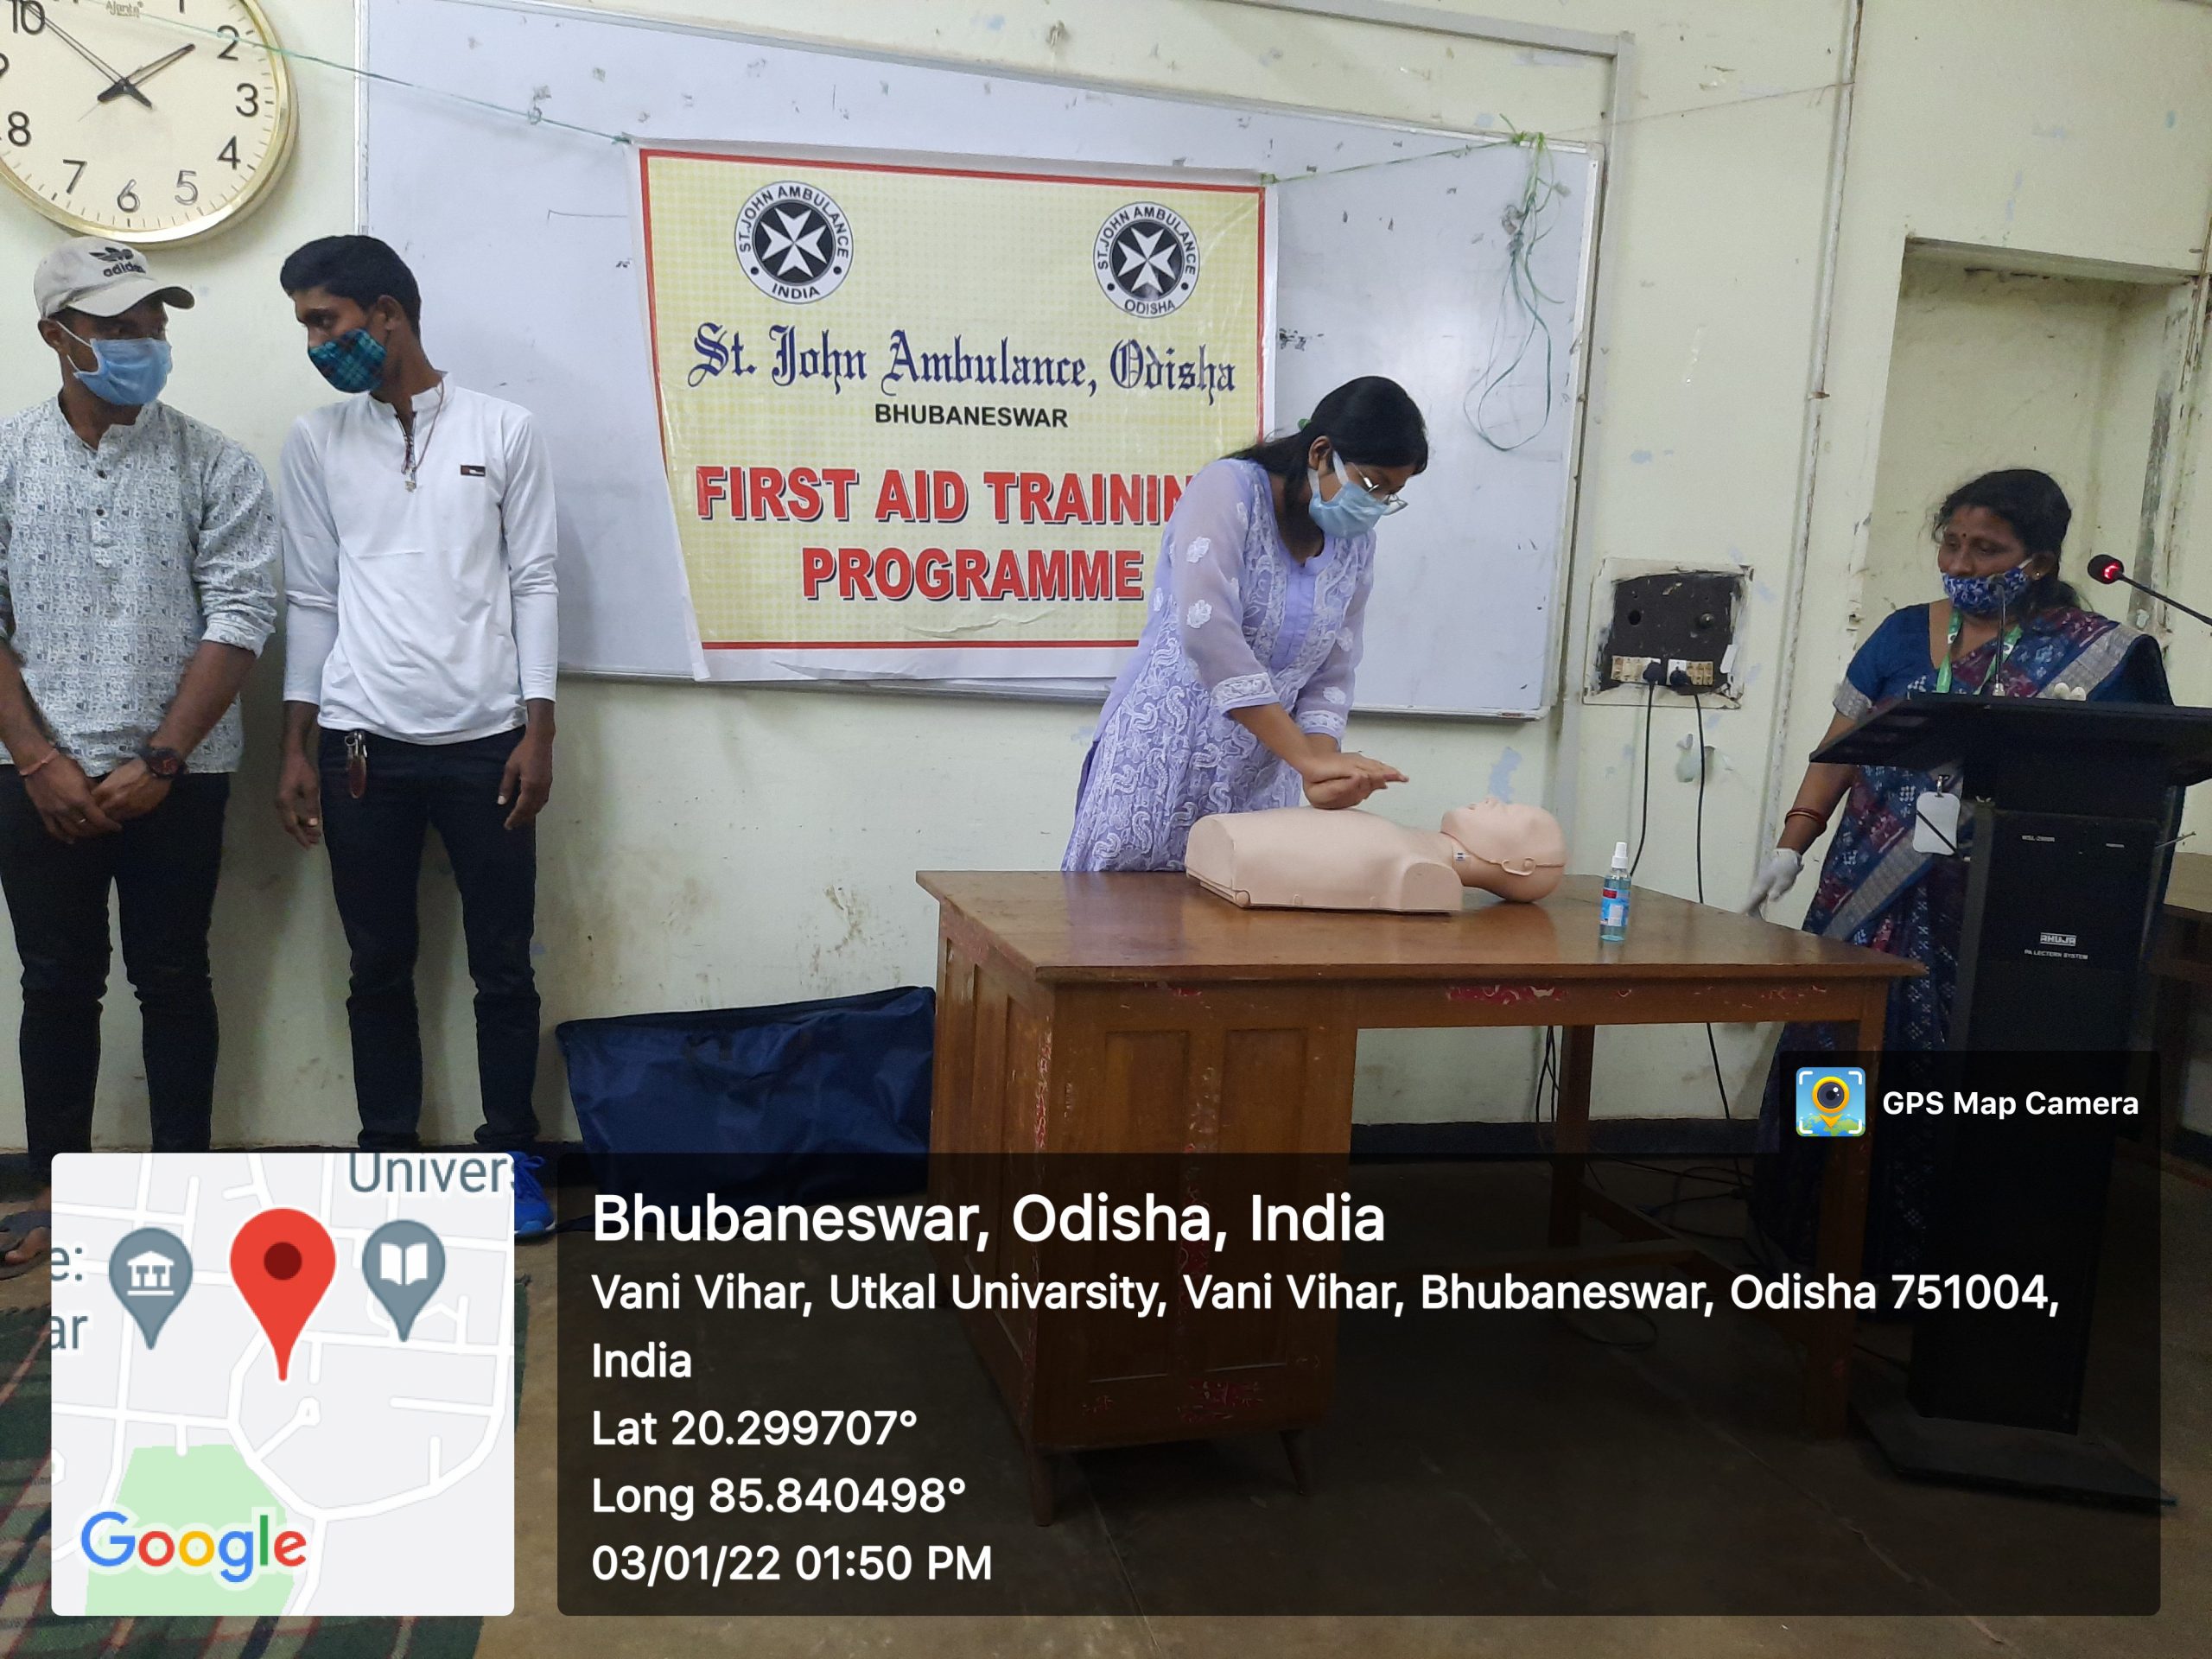 First Aid Training Programme in the Department of Sociology in collaboration with St. John Ambulance, Odisha.